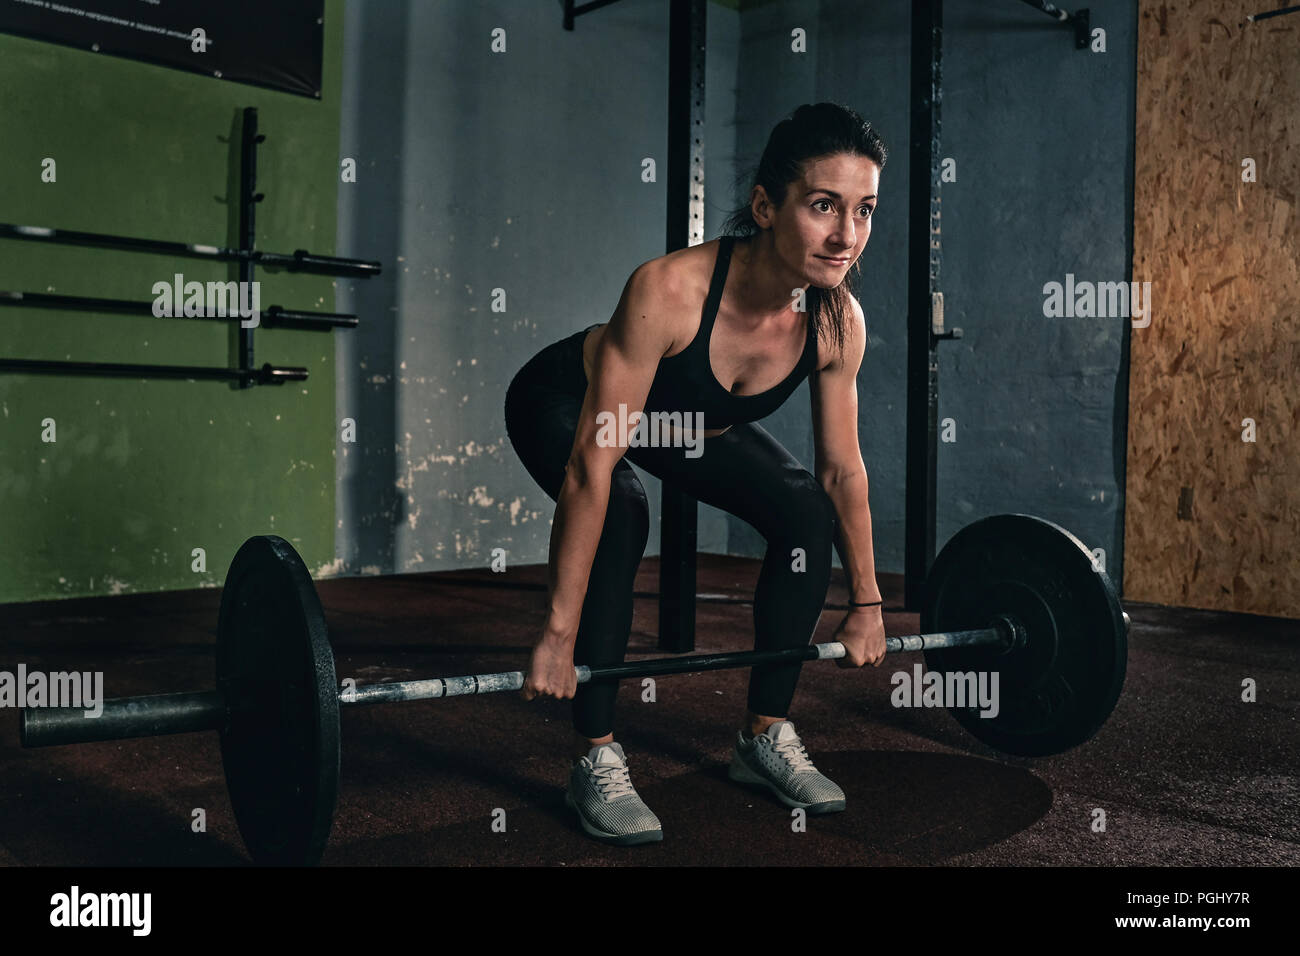 Muscular young fitness woman lifting a weight crossfit in the gym, fitness woman deadlift barbell. Stock Photo